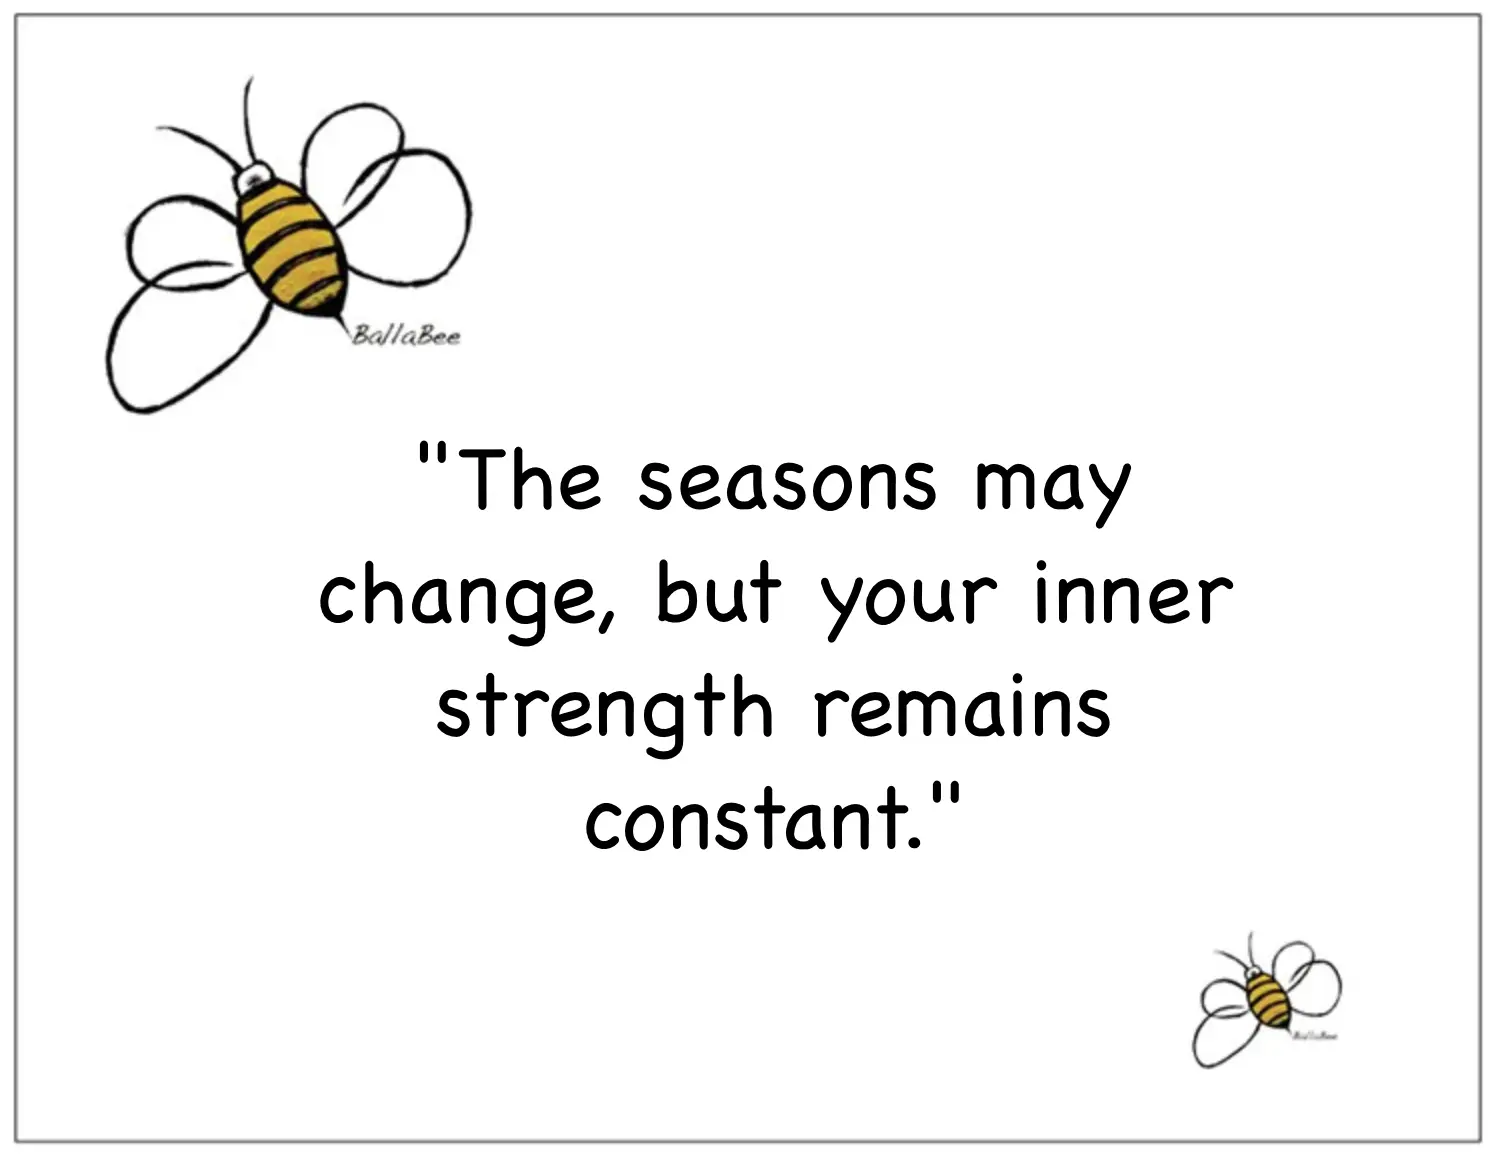 The seasons may change, but your inner strength remains constant